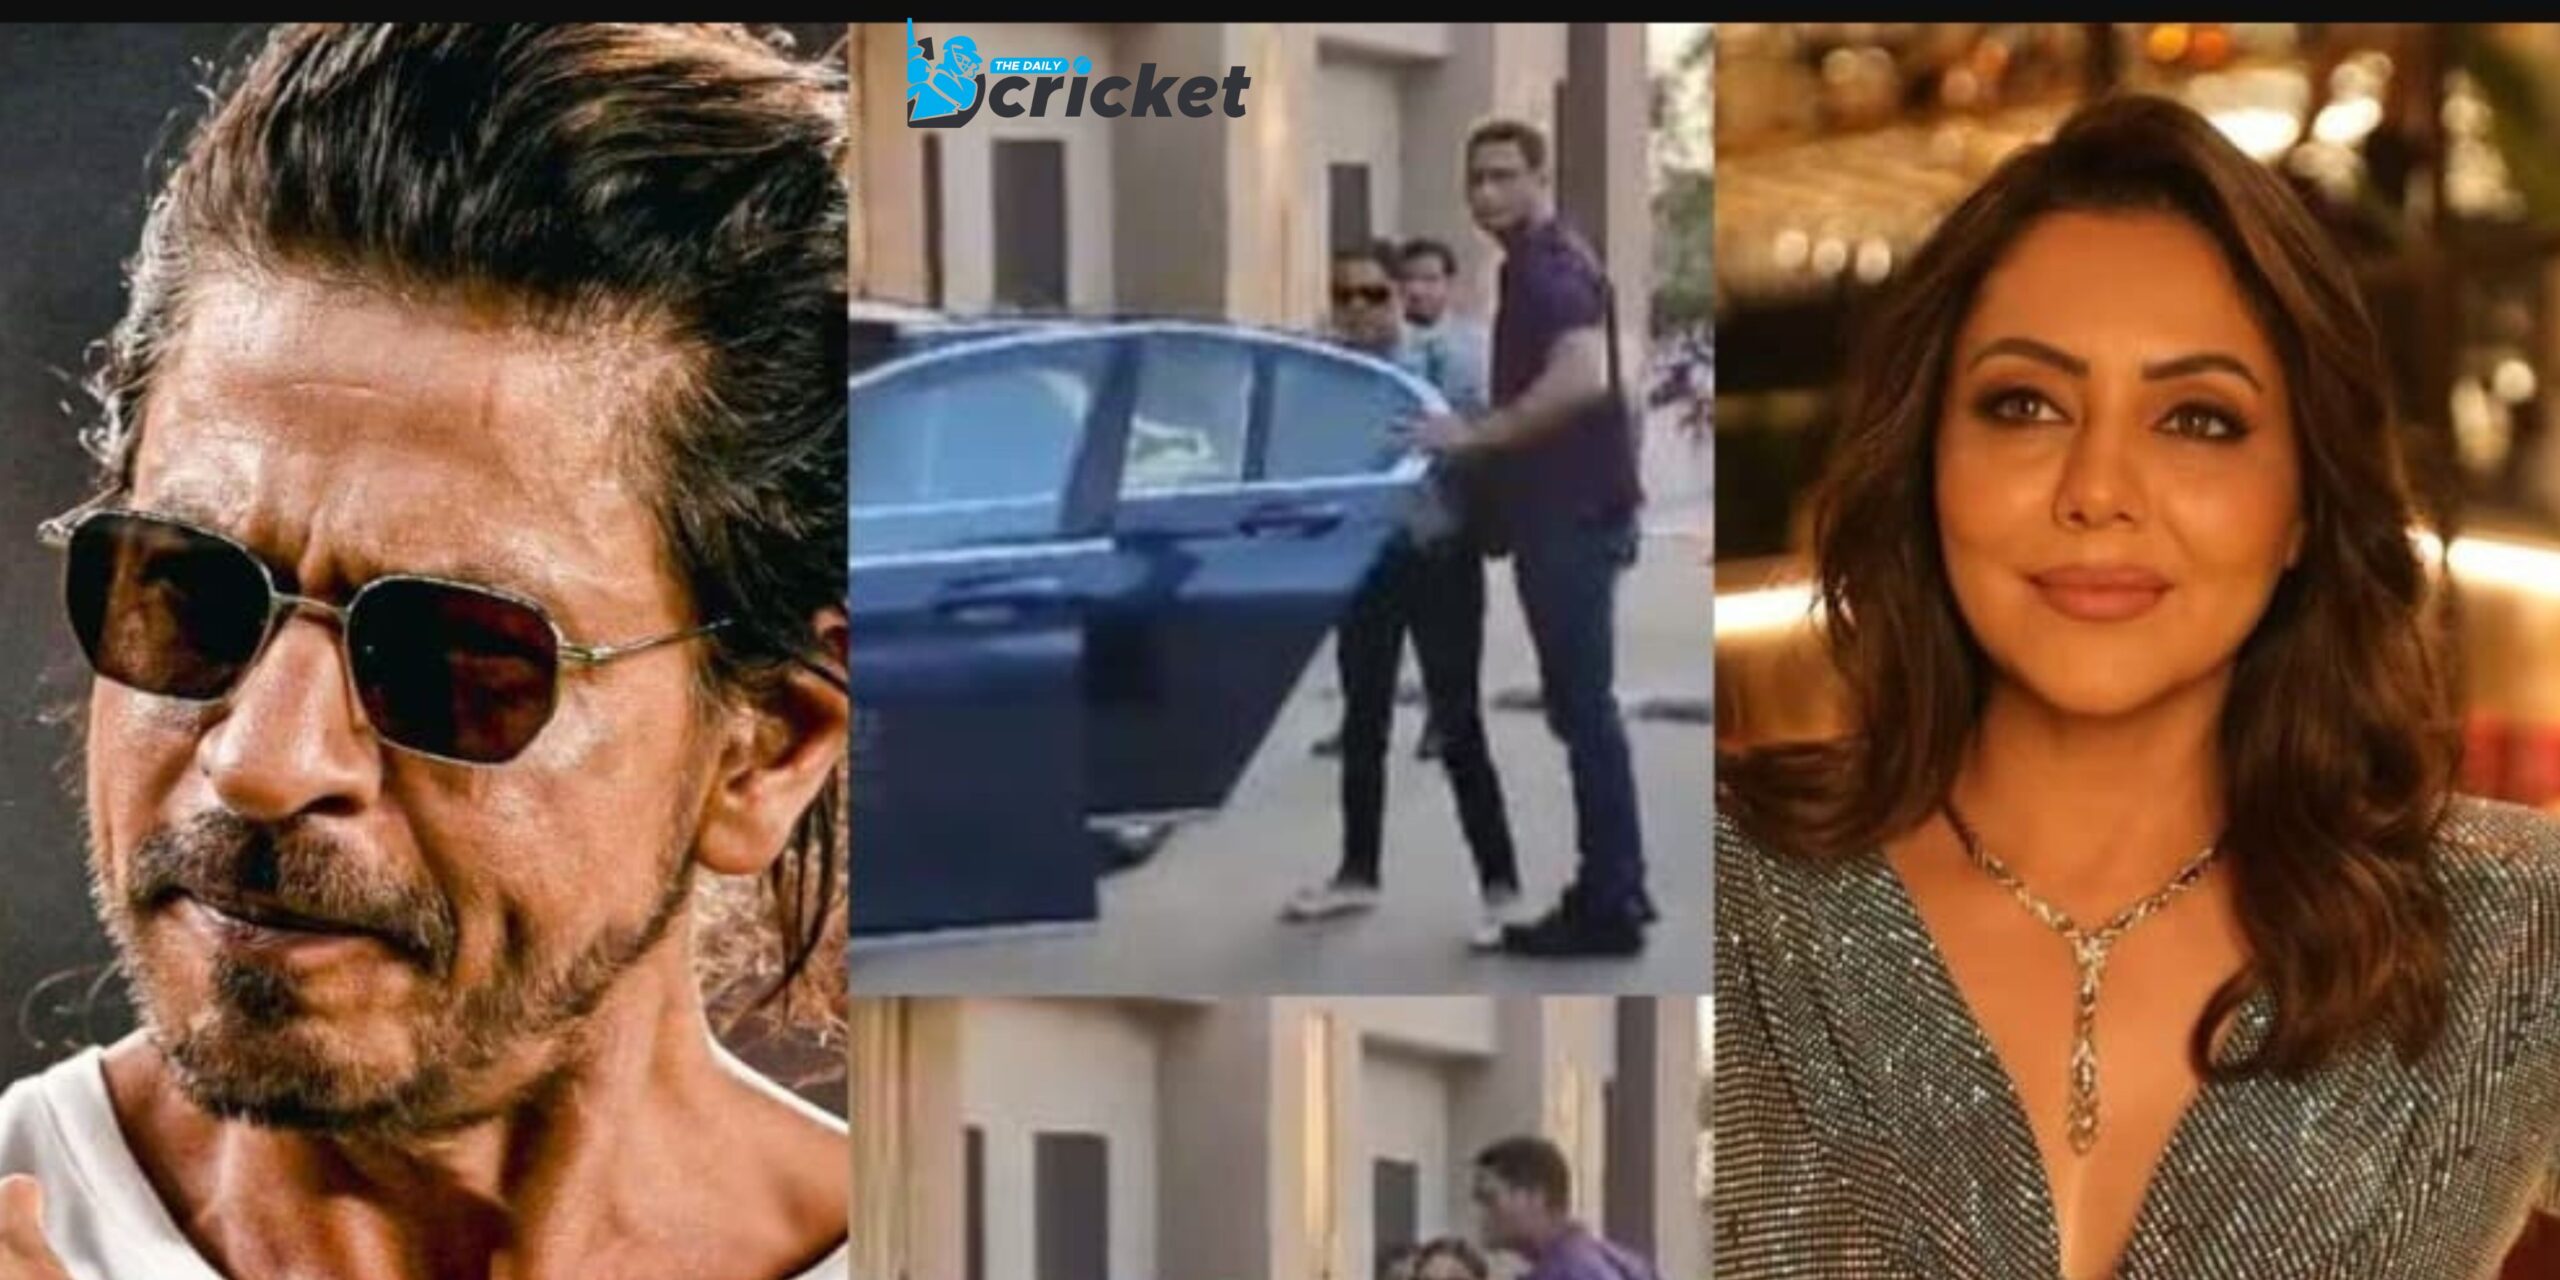 Shah Rukh Khan admitted to KD Hospital after KKR vs SRH match; wife Gauri reaches Ahmedabad.